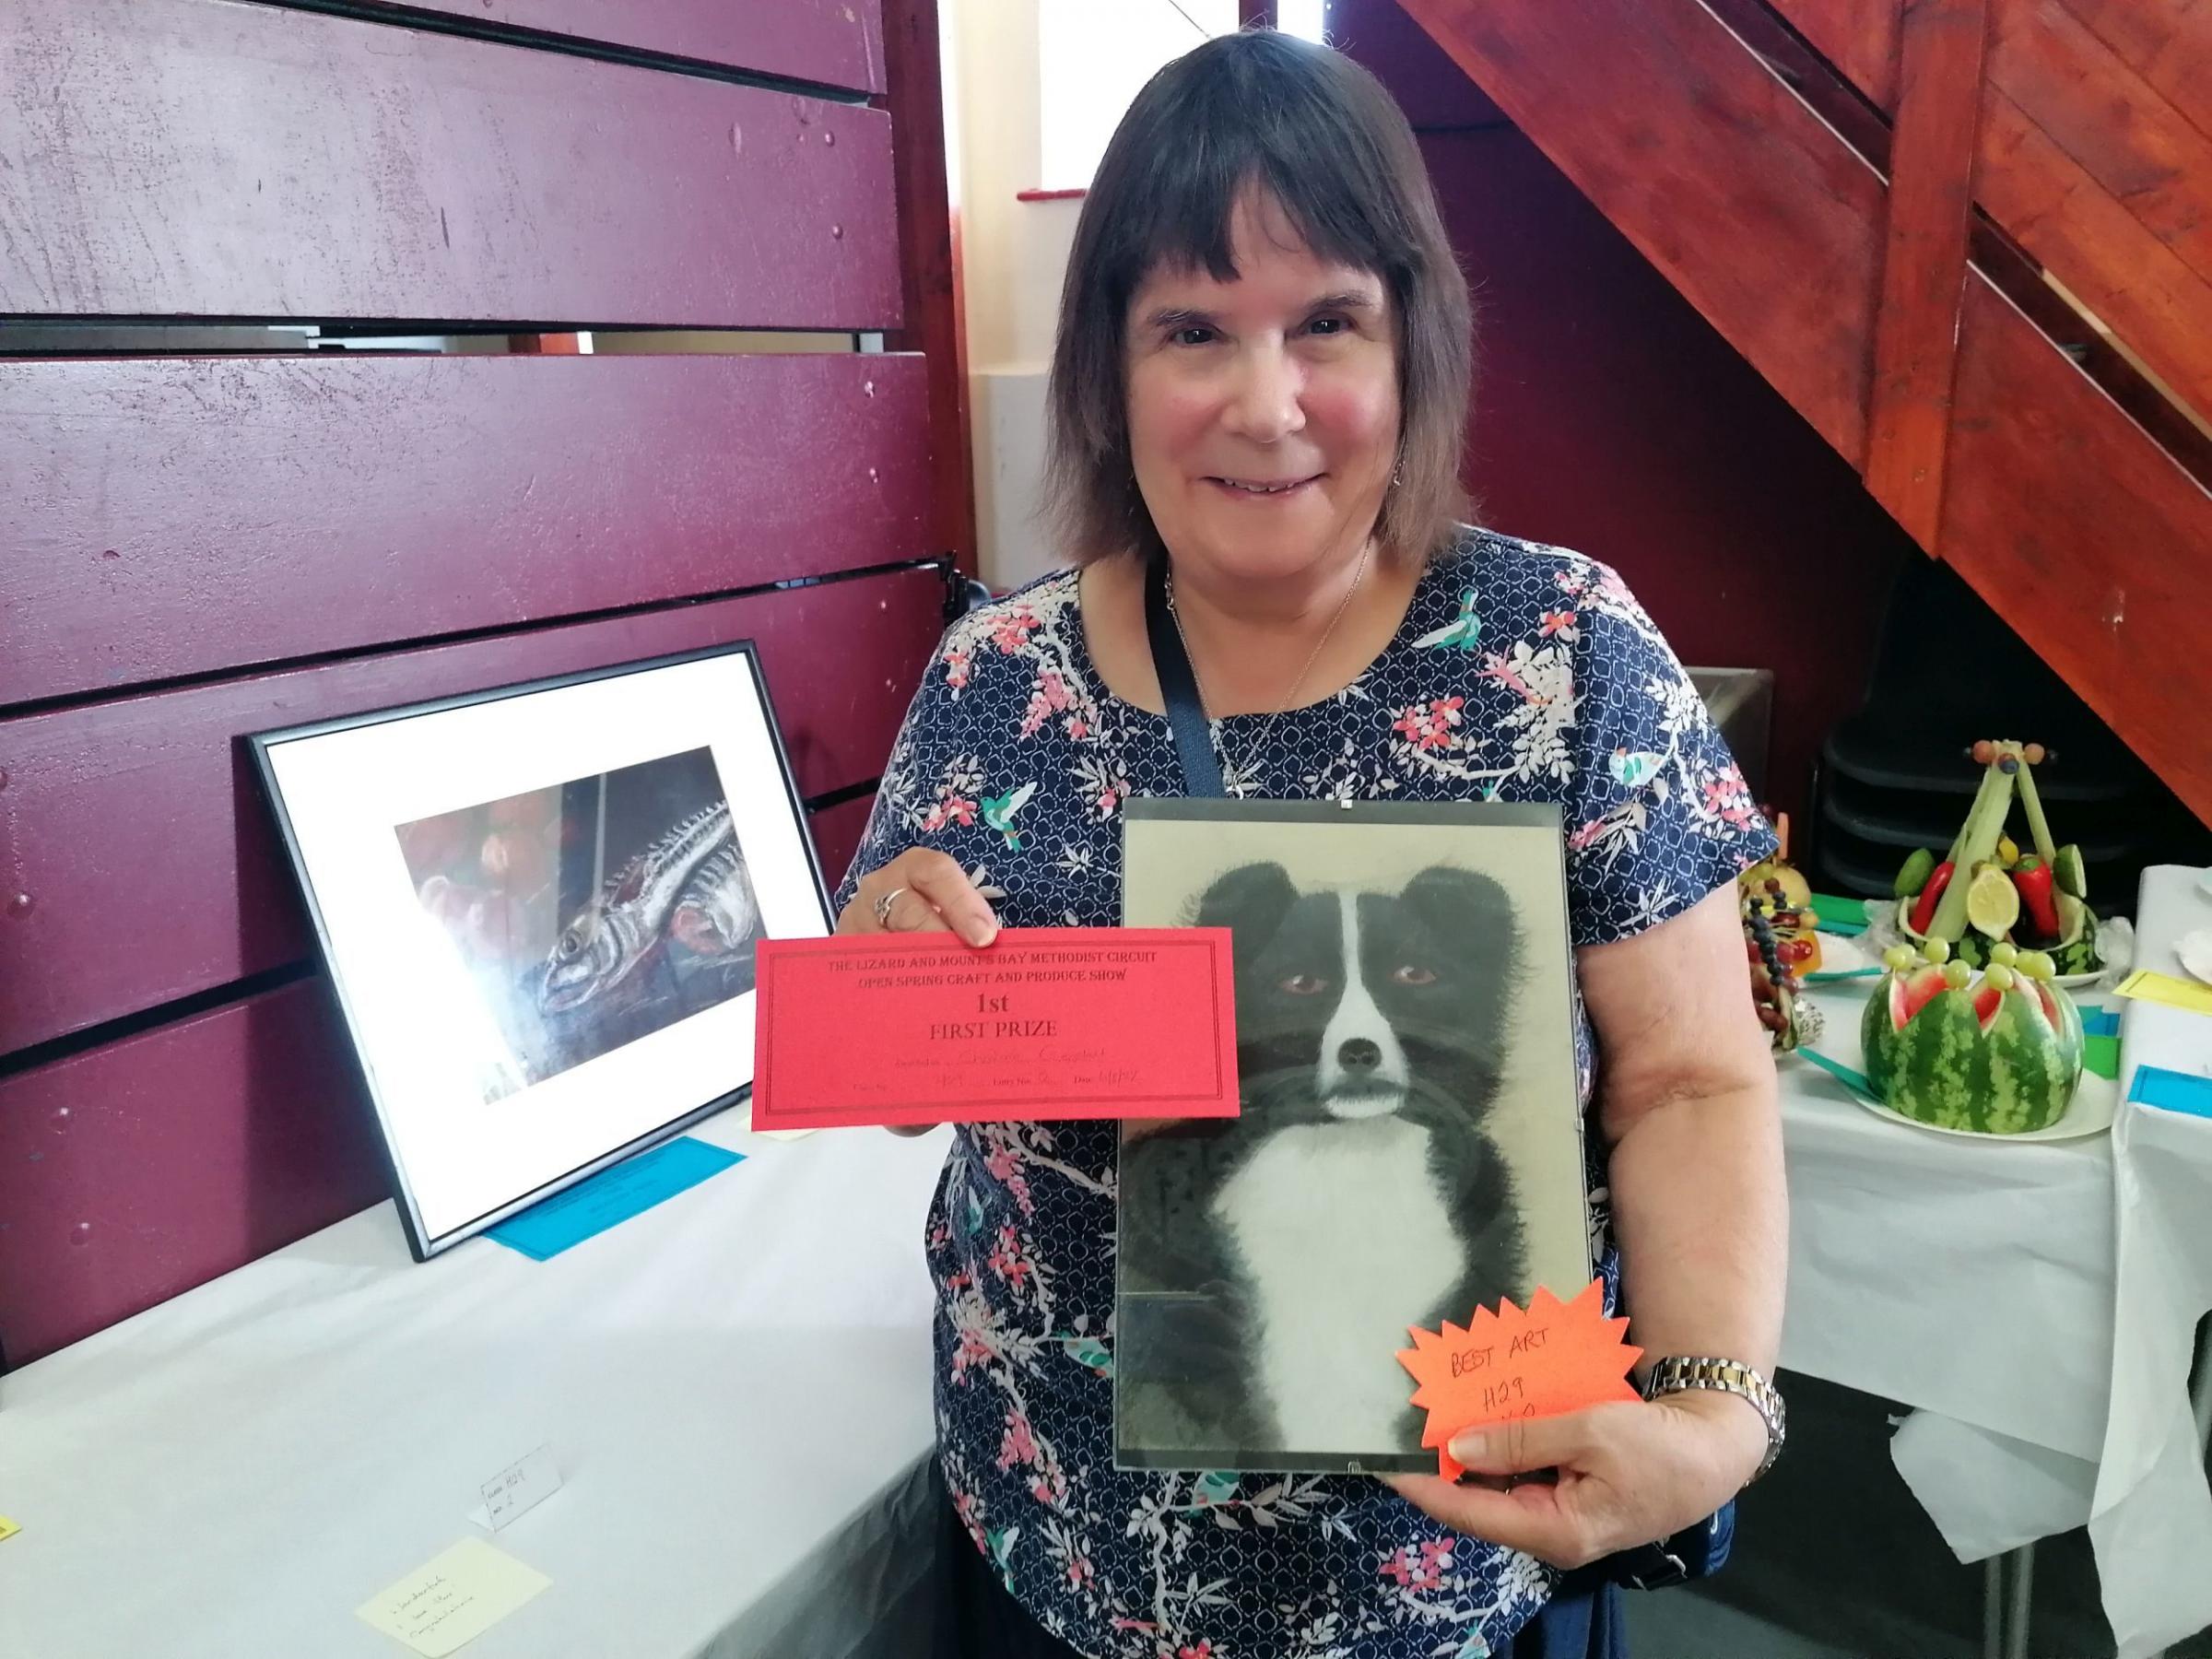 Christine Gendall won the cup for best art